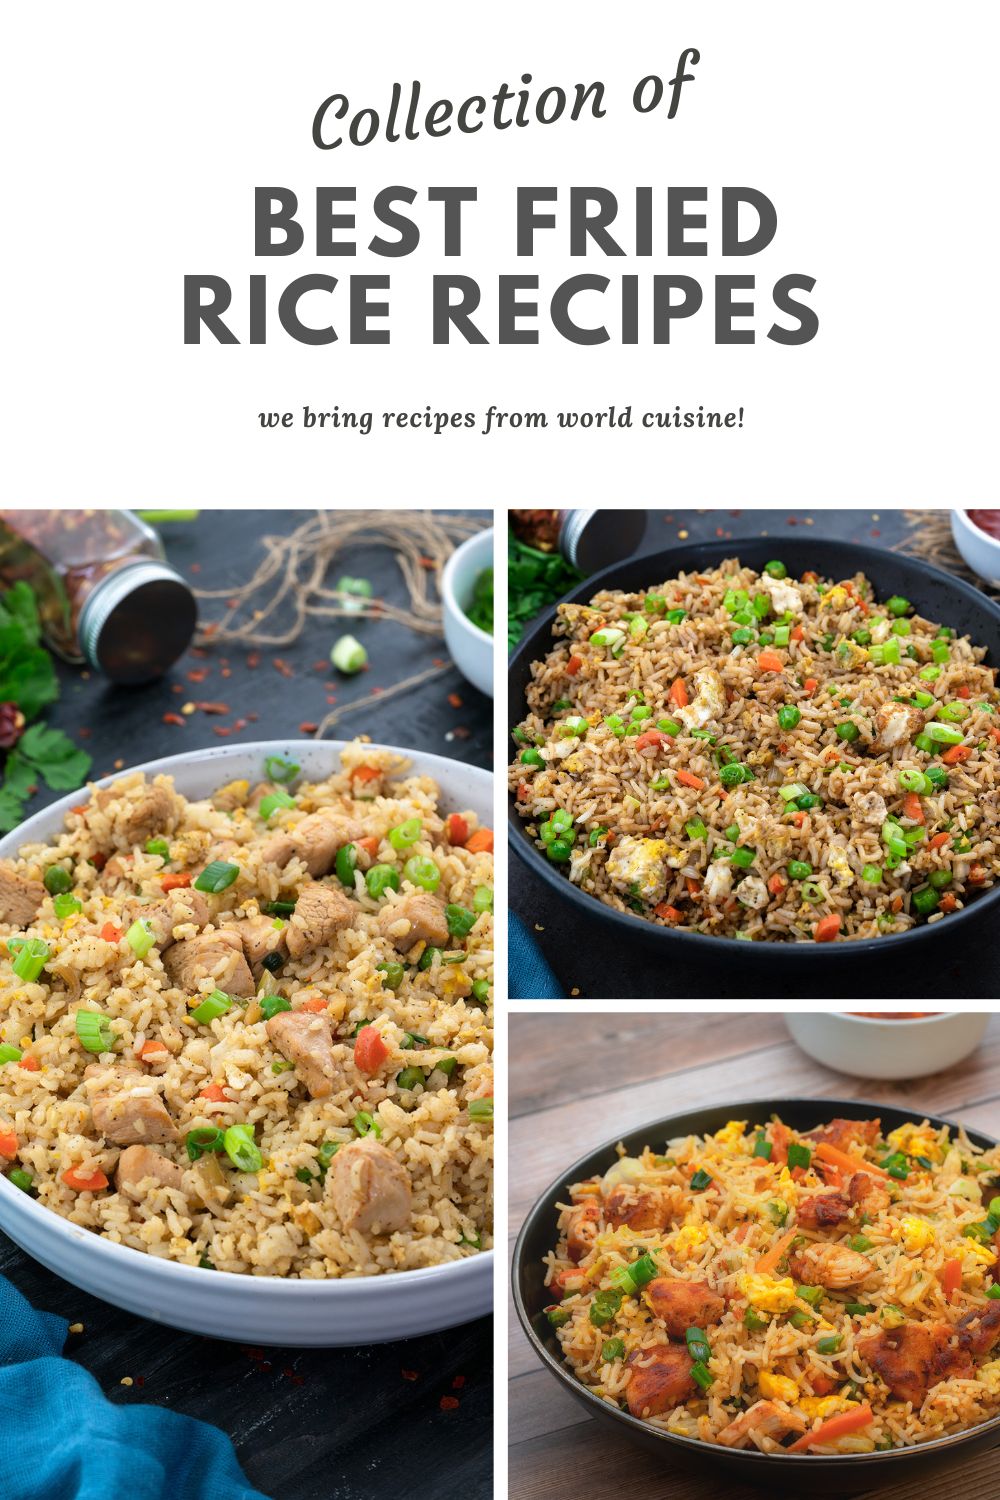 Collage of different fried rice recipes in bowls.